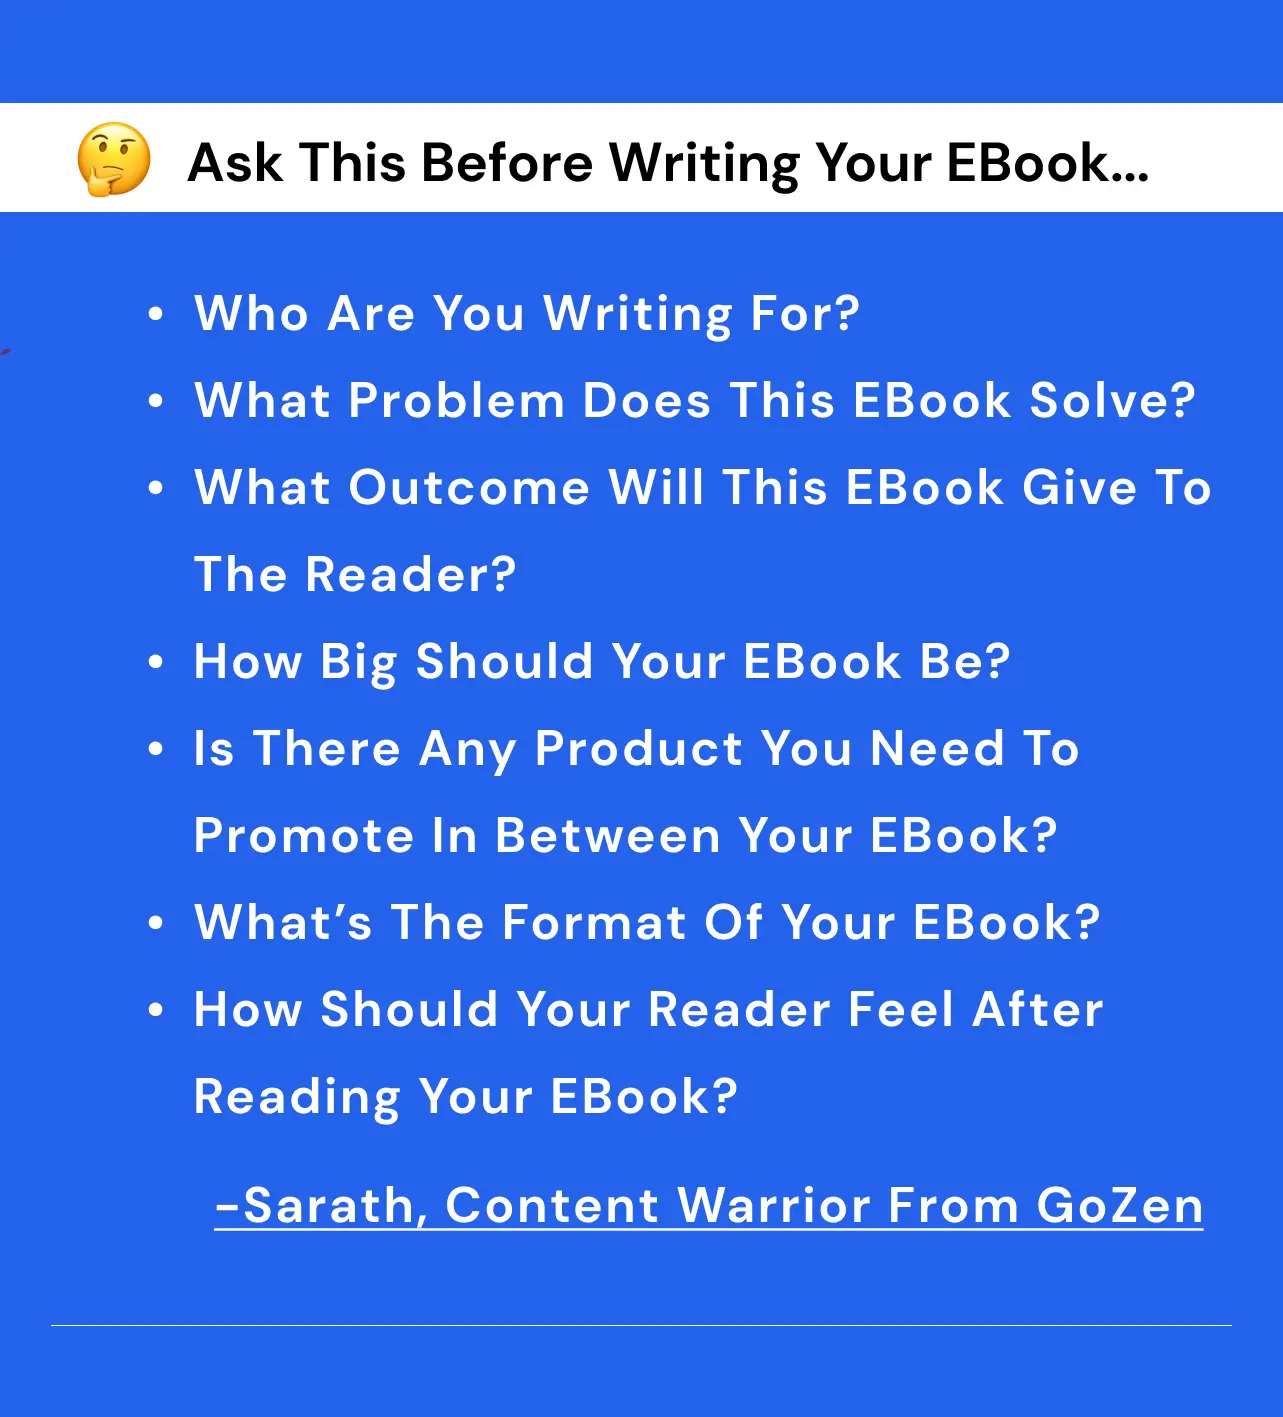 Ask these questions before writing an ebook